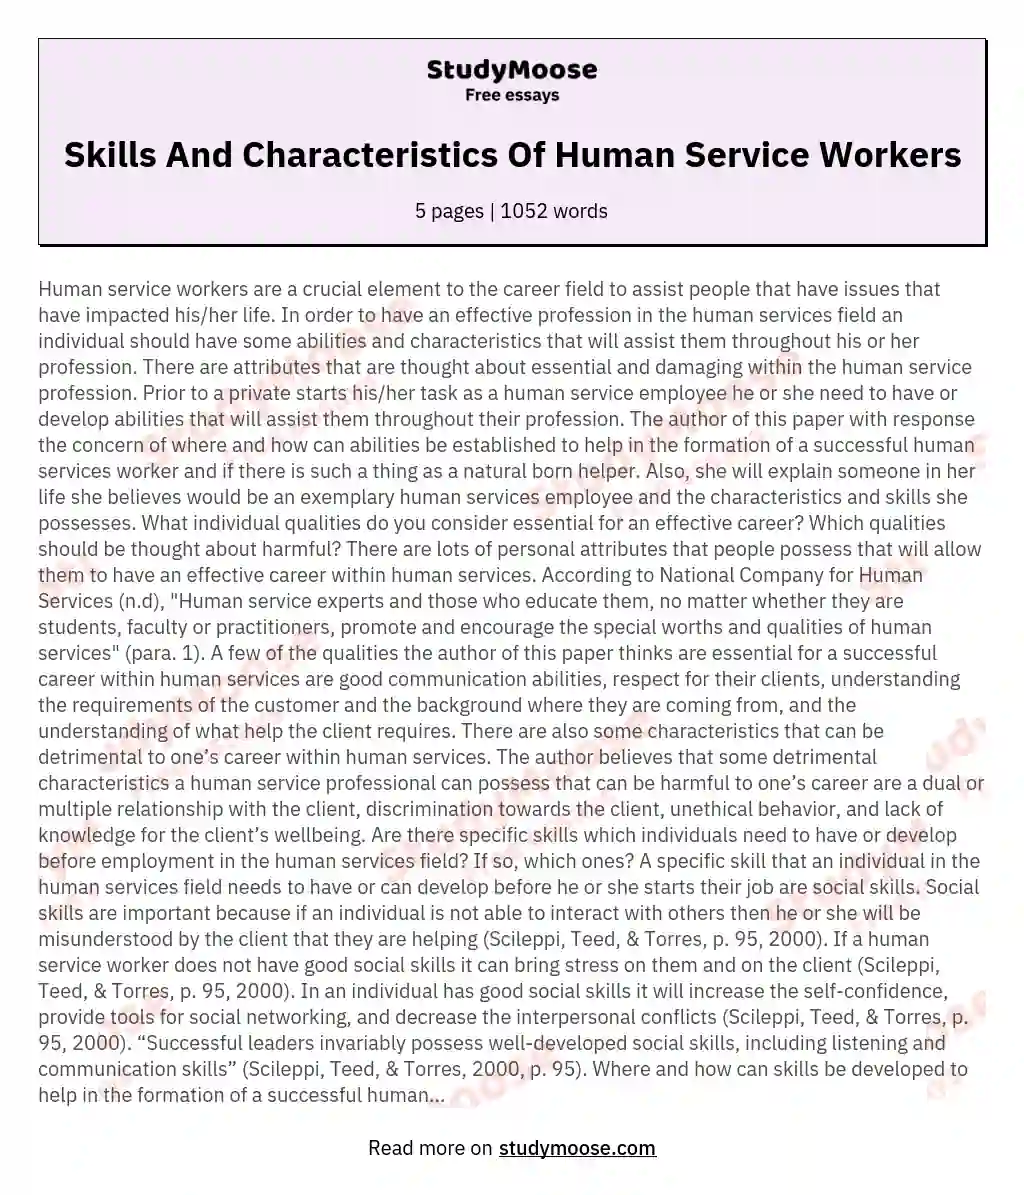 Skills And Characteristics Of Human Service Workers essay